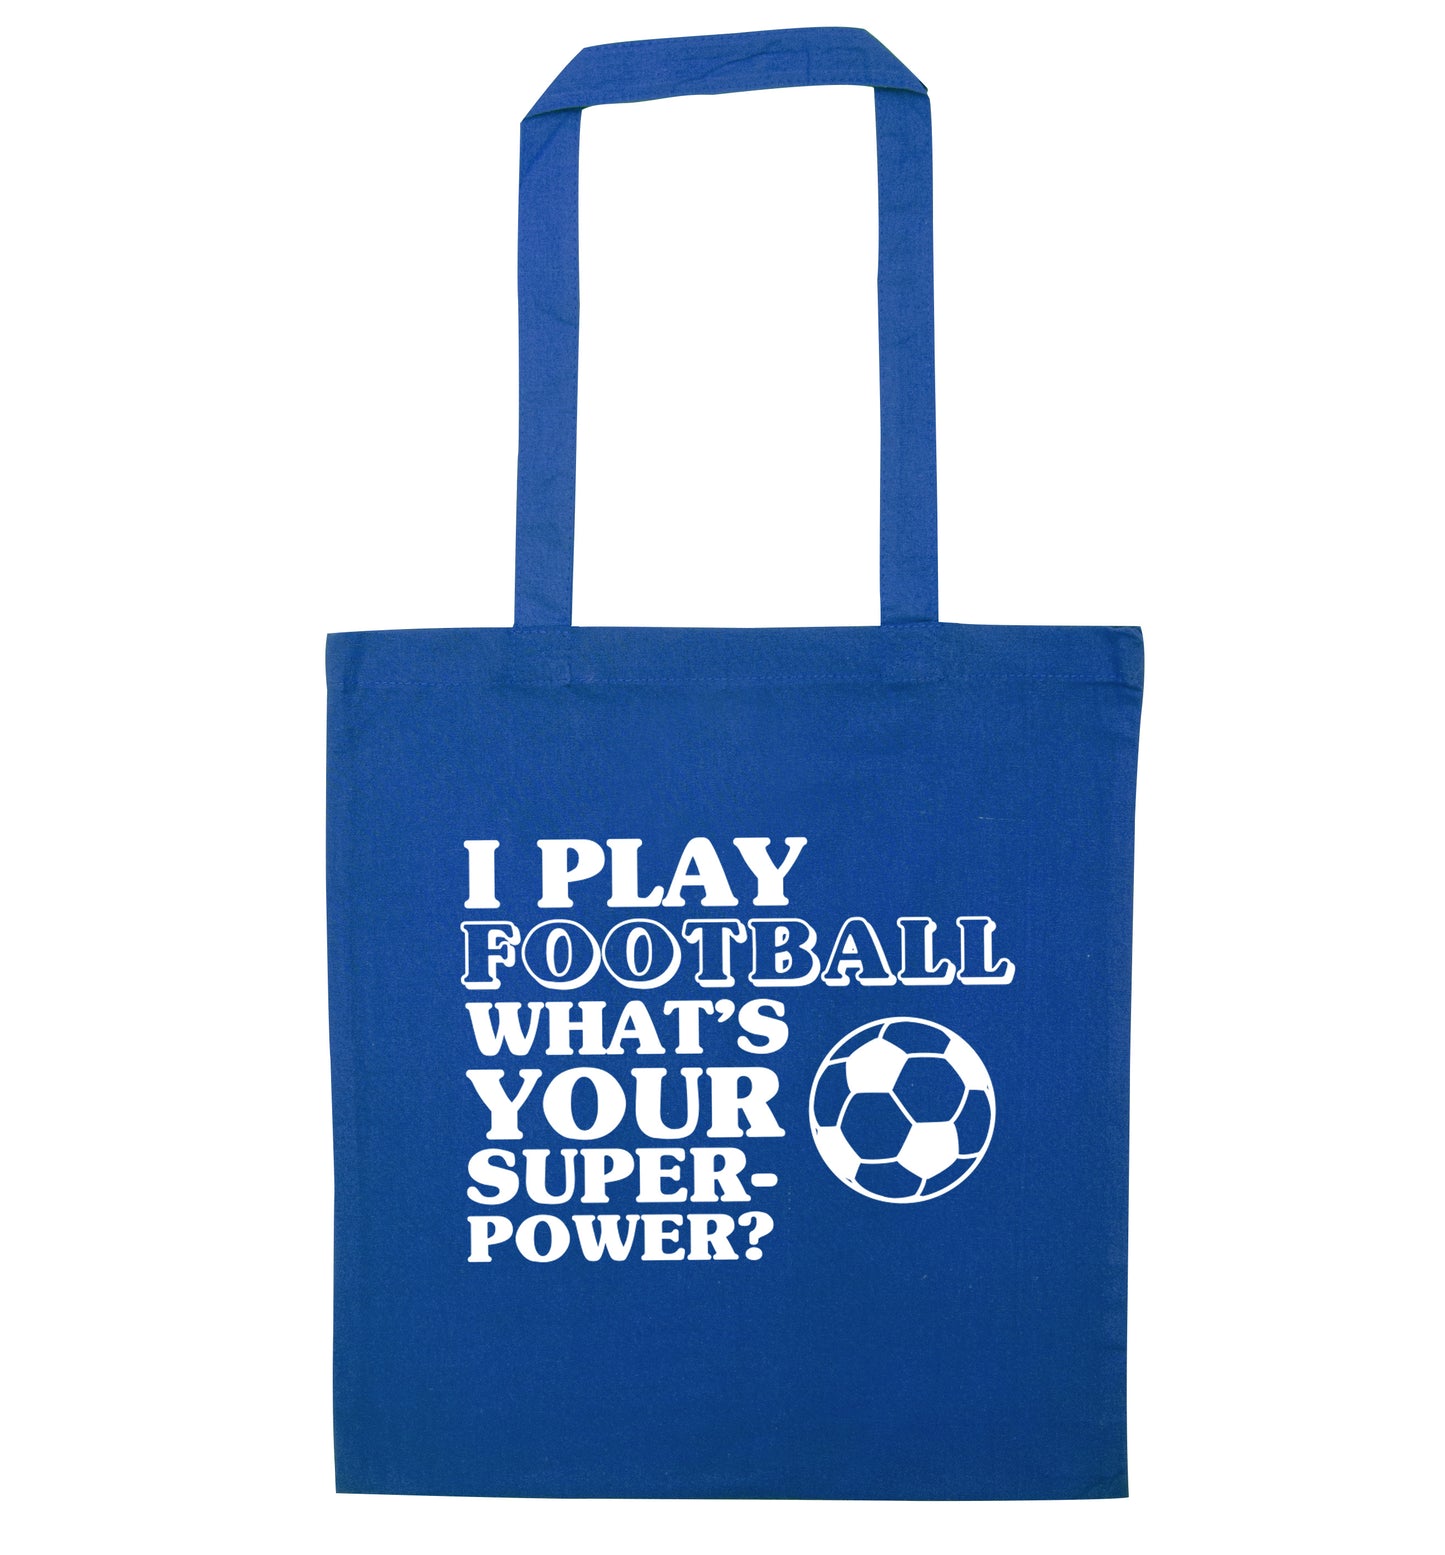 I play football what's your superpower? blue tote bag